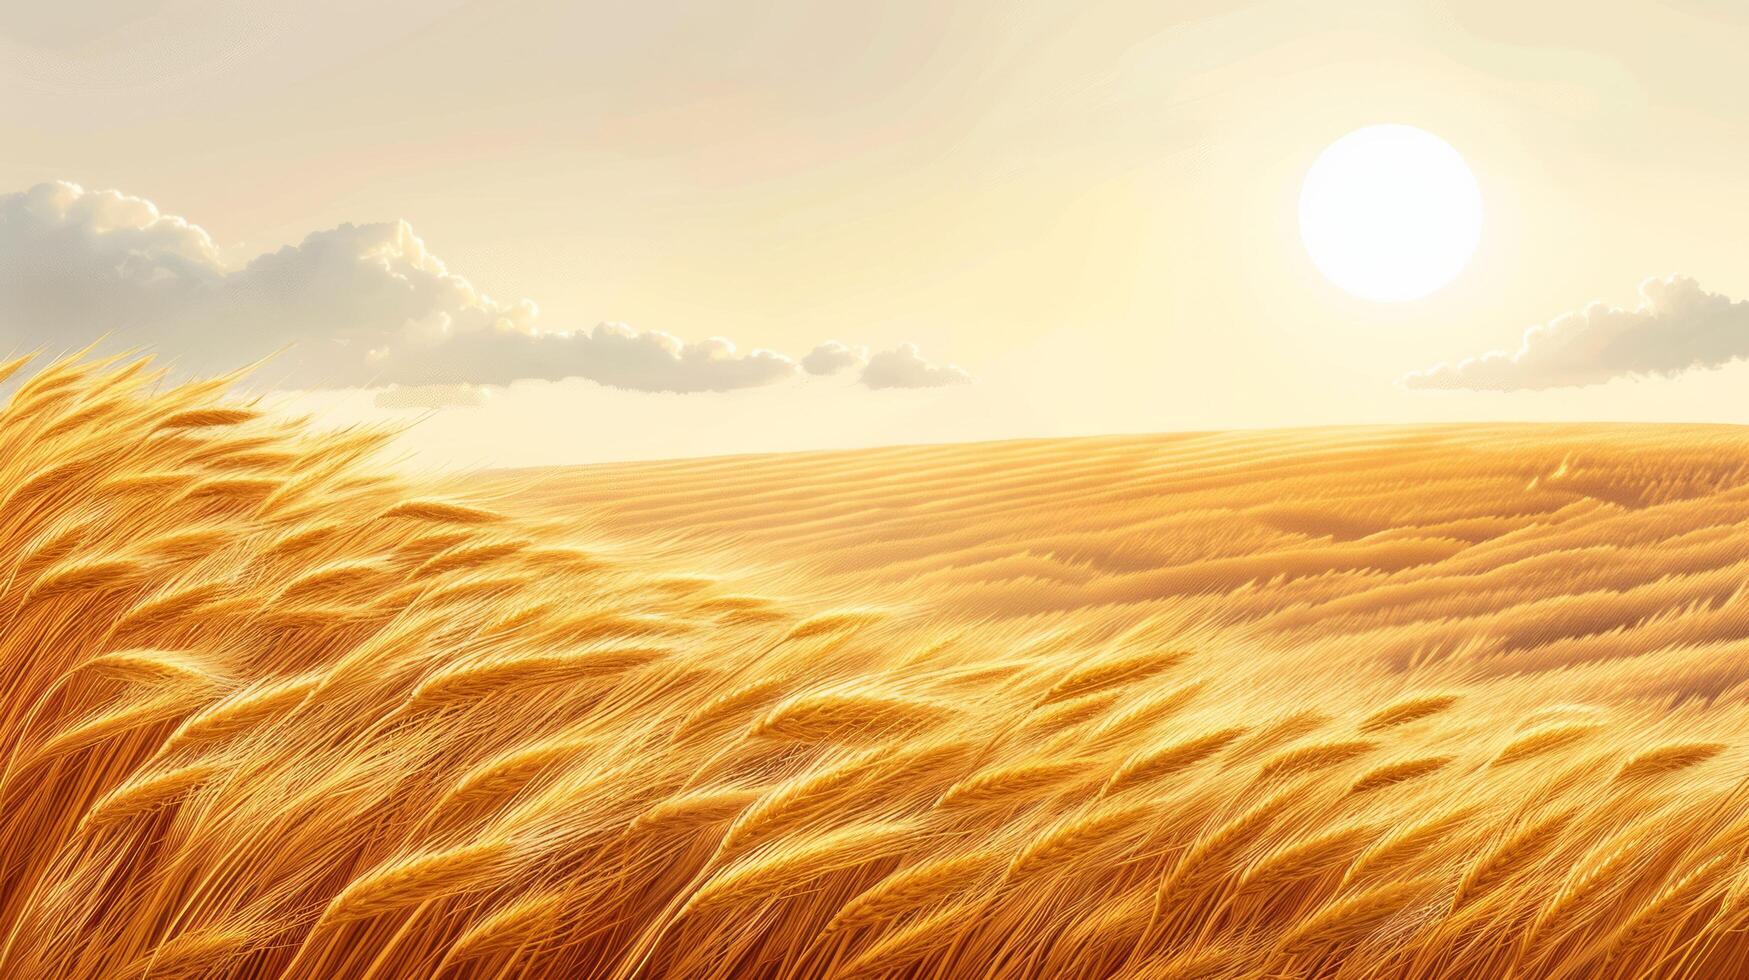 AI generated golden wheat field, with ripe wheat swaying in wind and the sun casting a warm glow over the scene photo